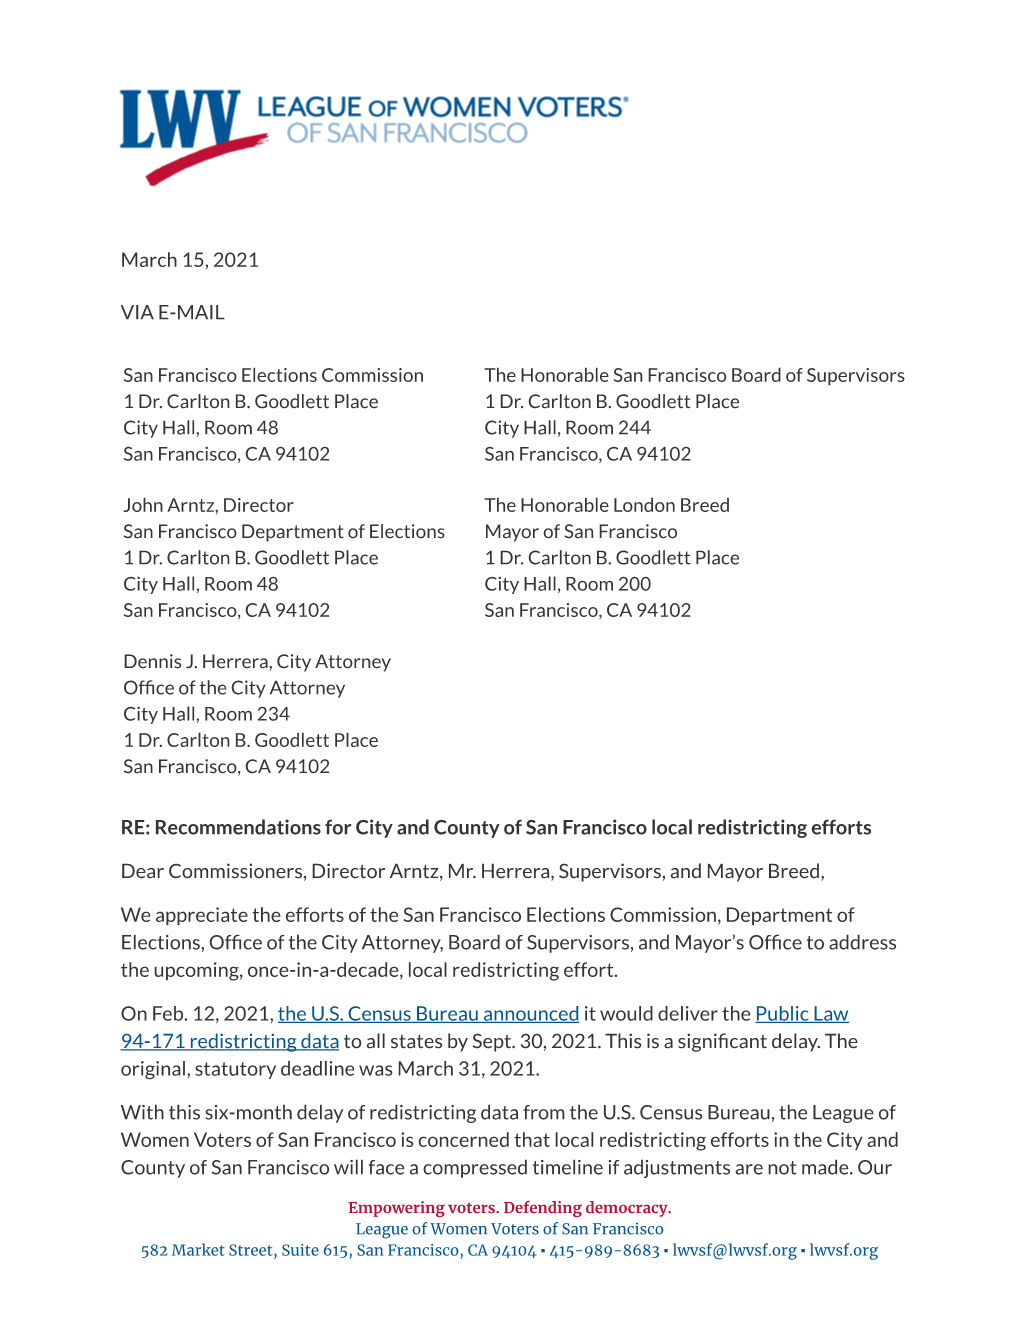 March 15, 2021 VIA E-MAIL RE: Recommendations for City and County of San Francisco Local Redistricting Ef